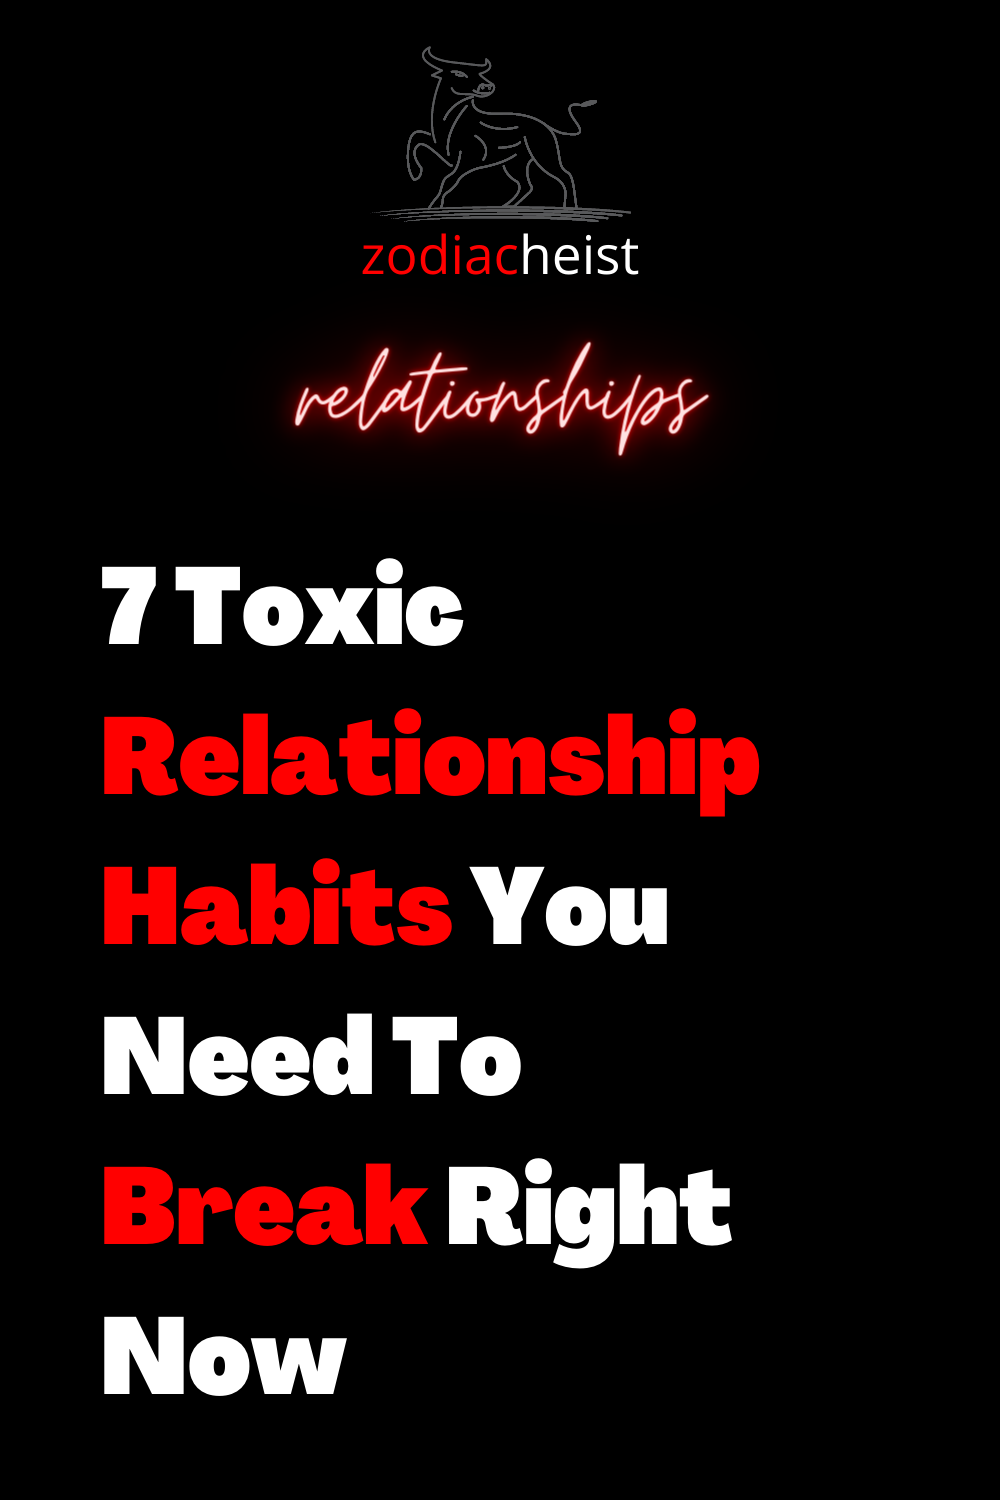 7 Toxic Relationship Habits You Need To Break Right Now